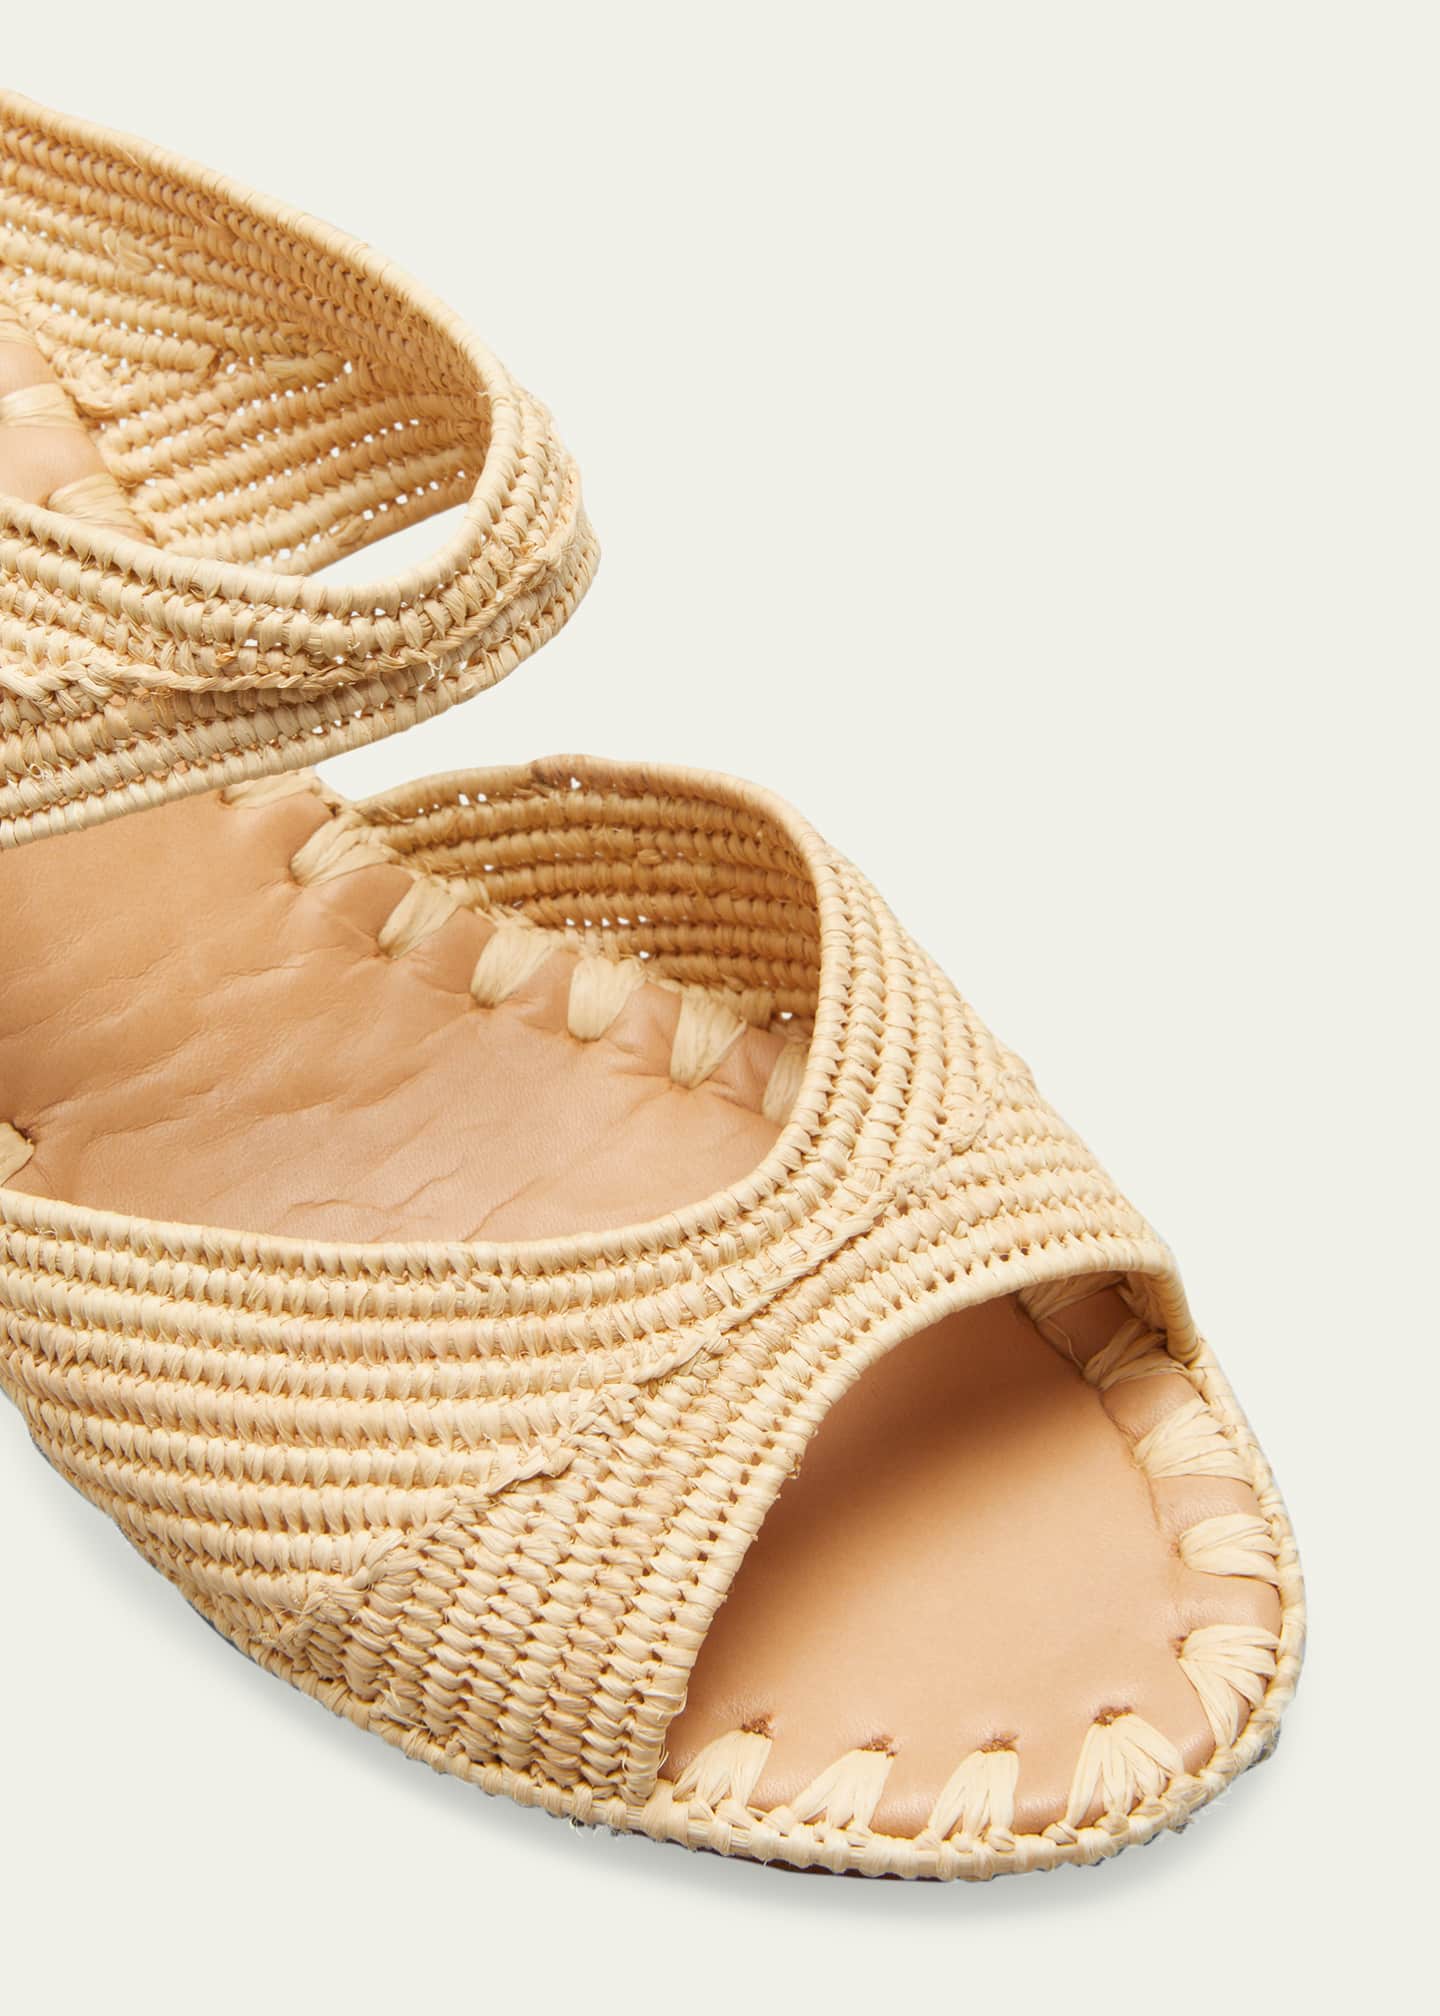 Carrie Forbes Houcine Raffia Wedge Sandals Image 5 of 5